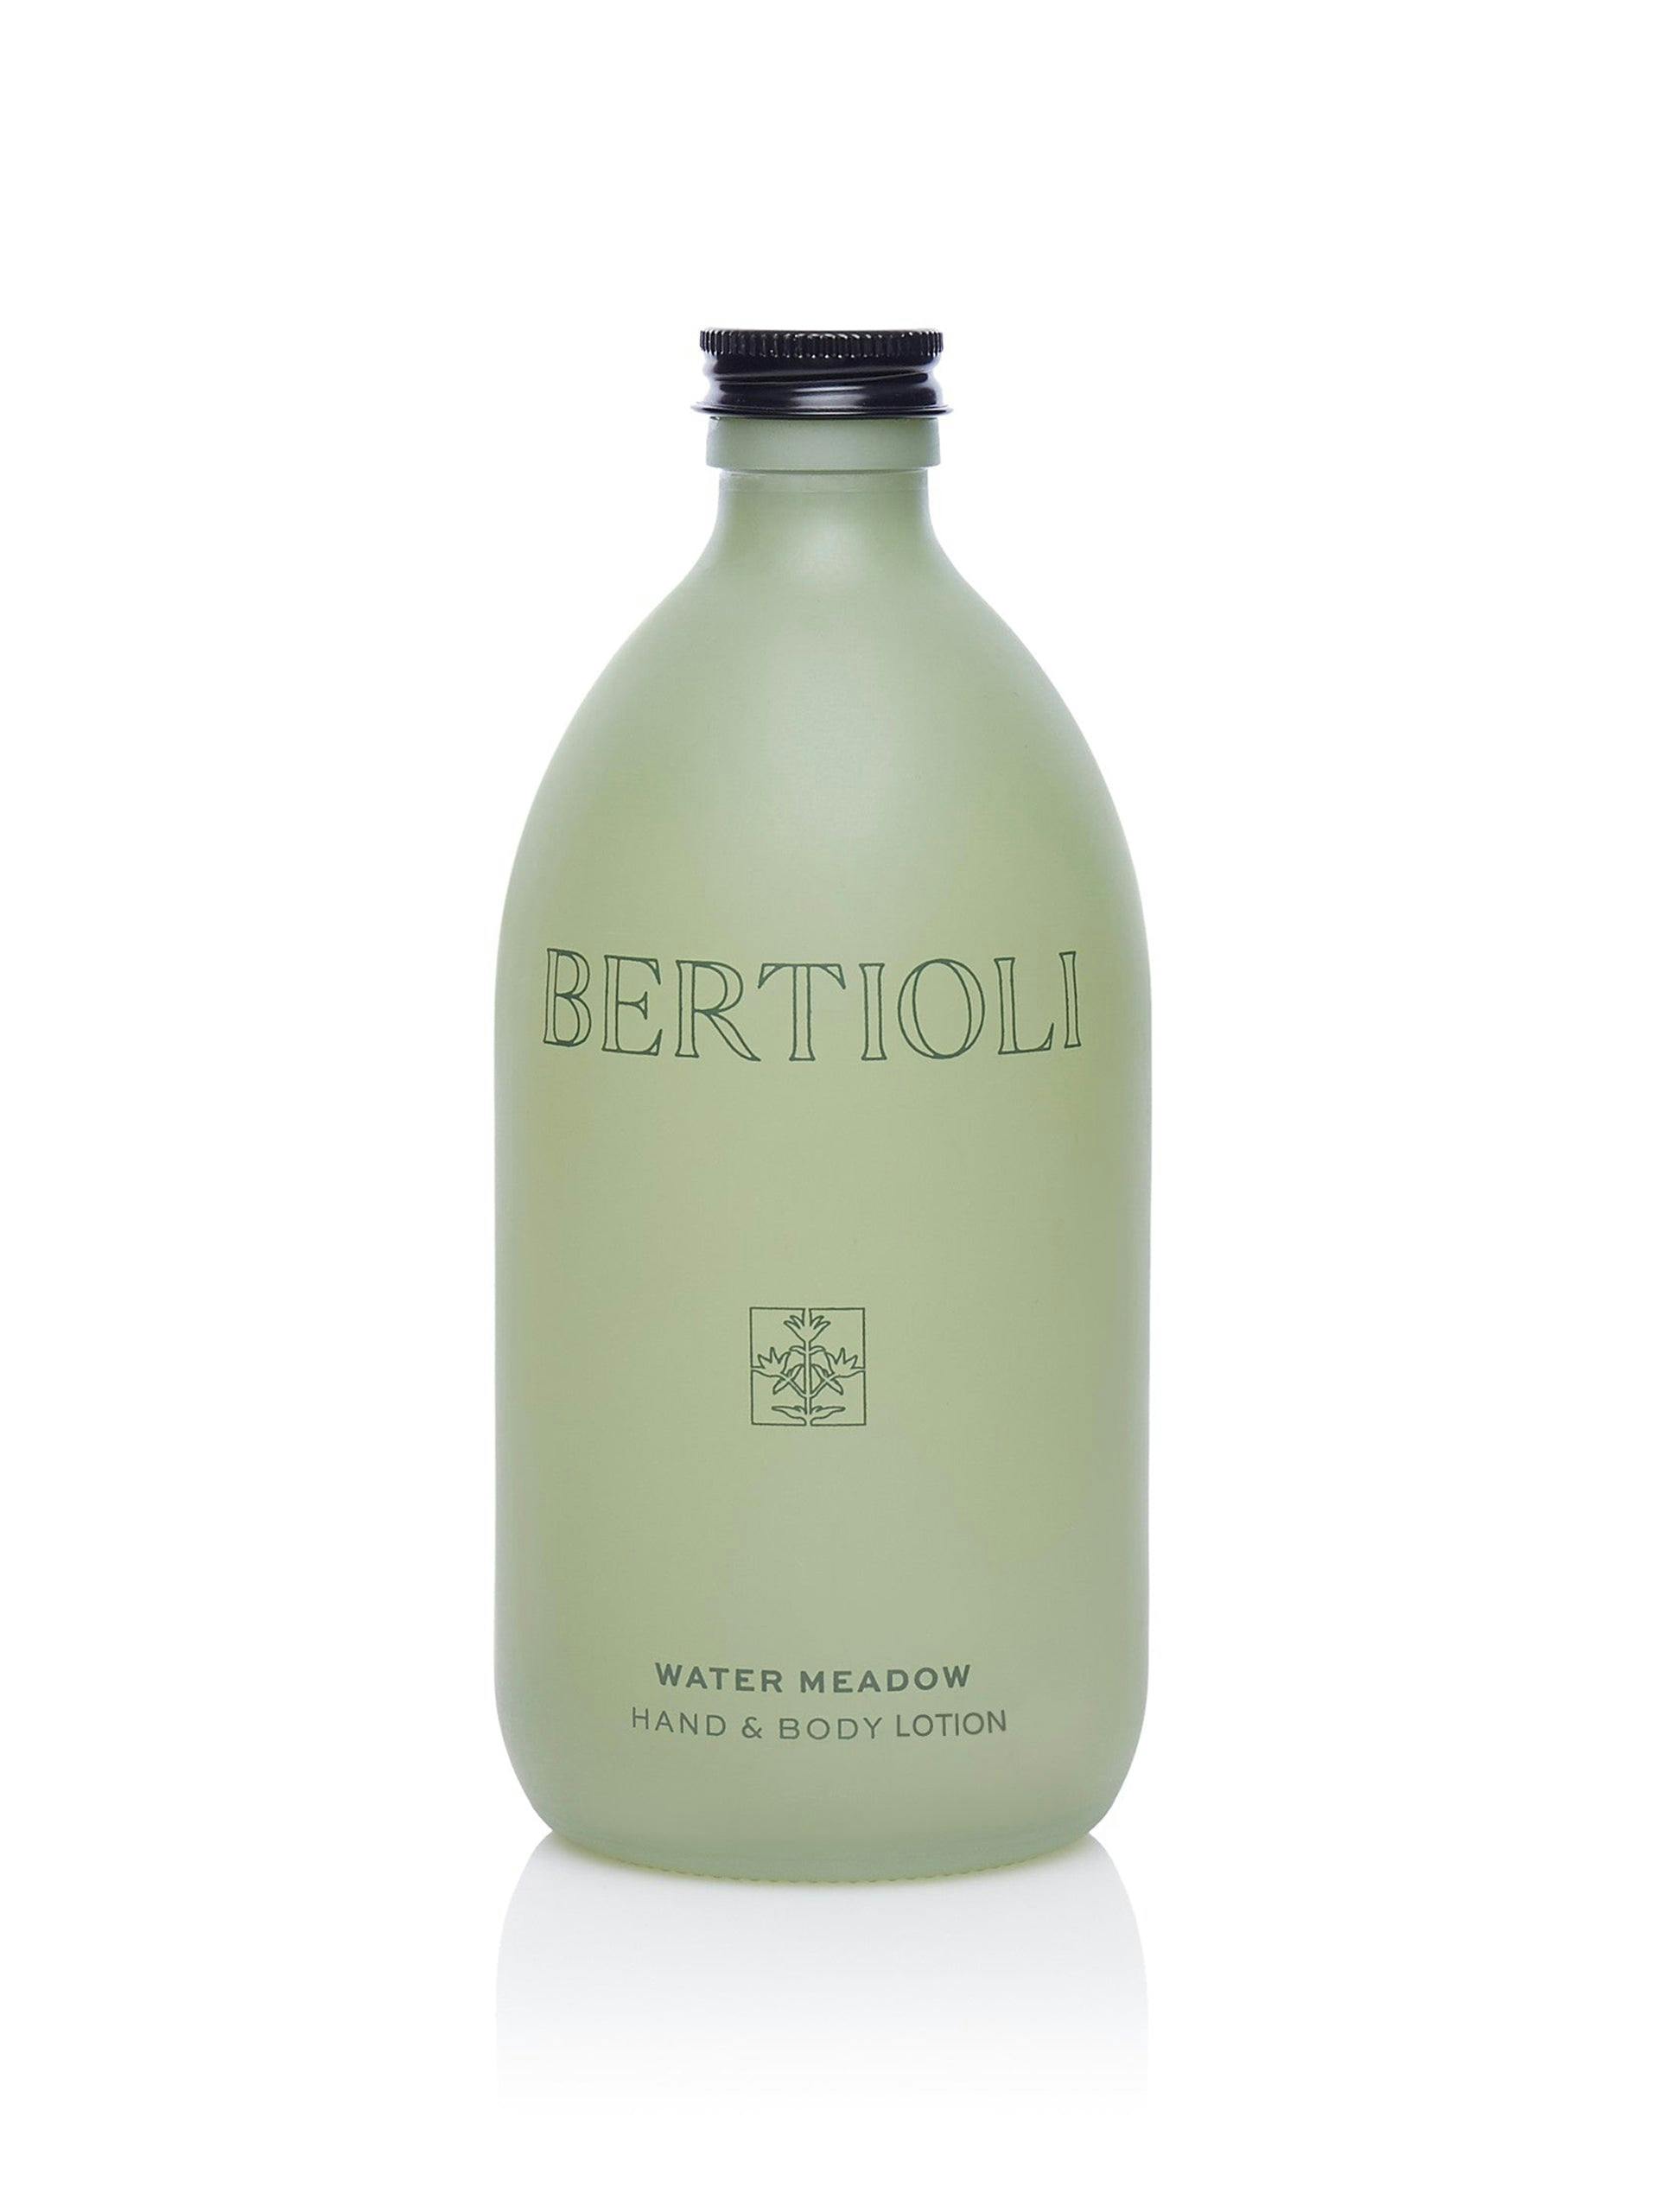 Water Meadow hand and body lotion